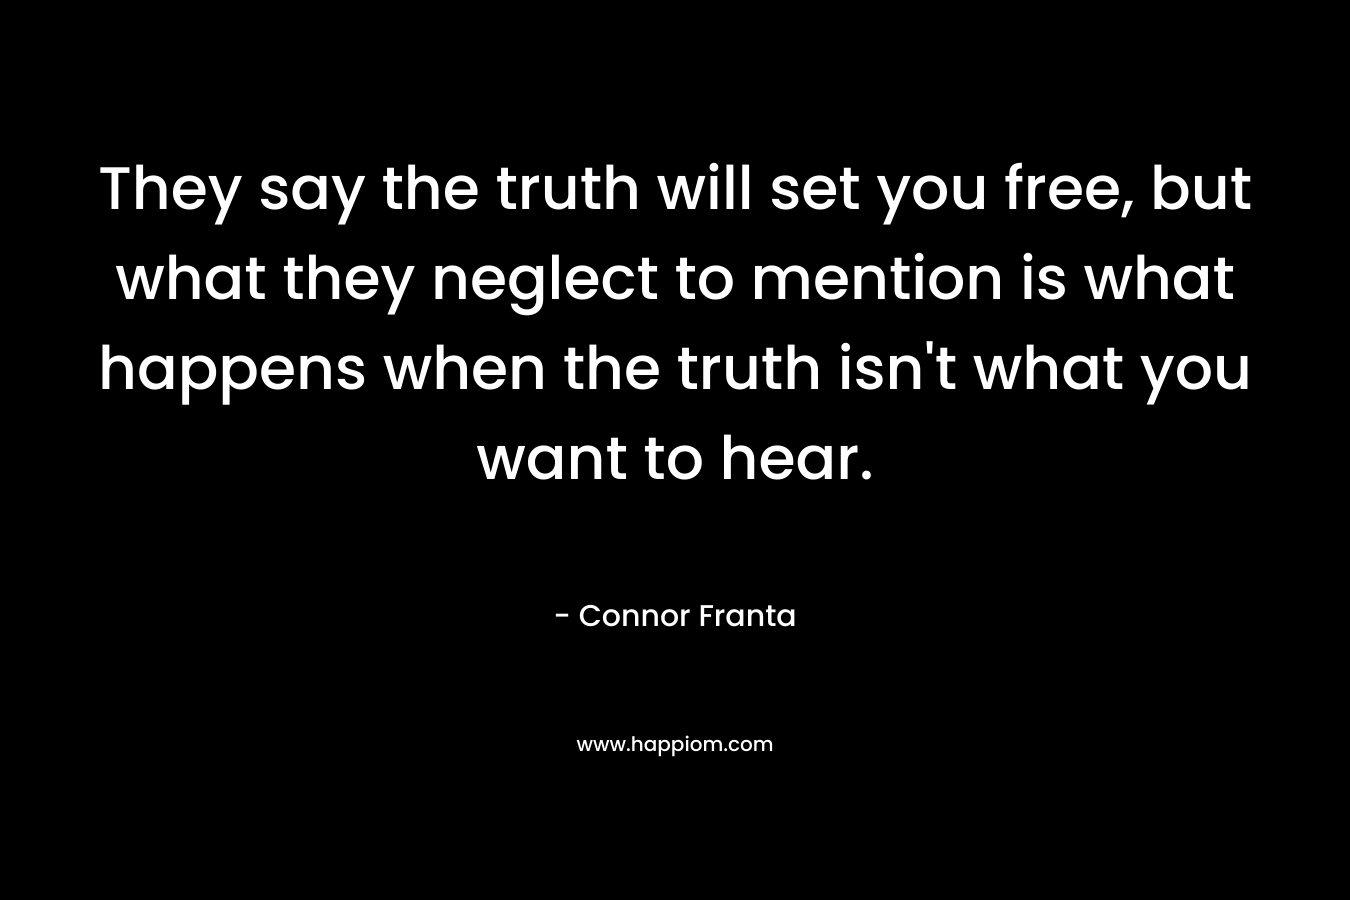 They say the truth will set you free, but what they neglect to mention is what happens when the truth isn’t what you want to hear. – Connor Franta